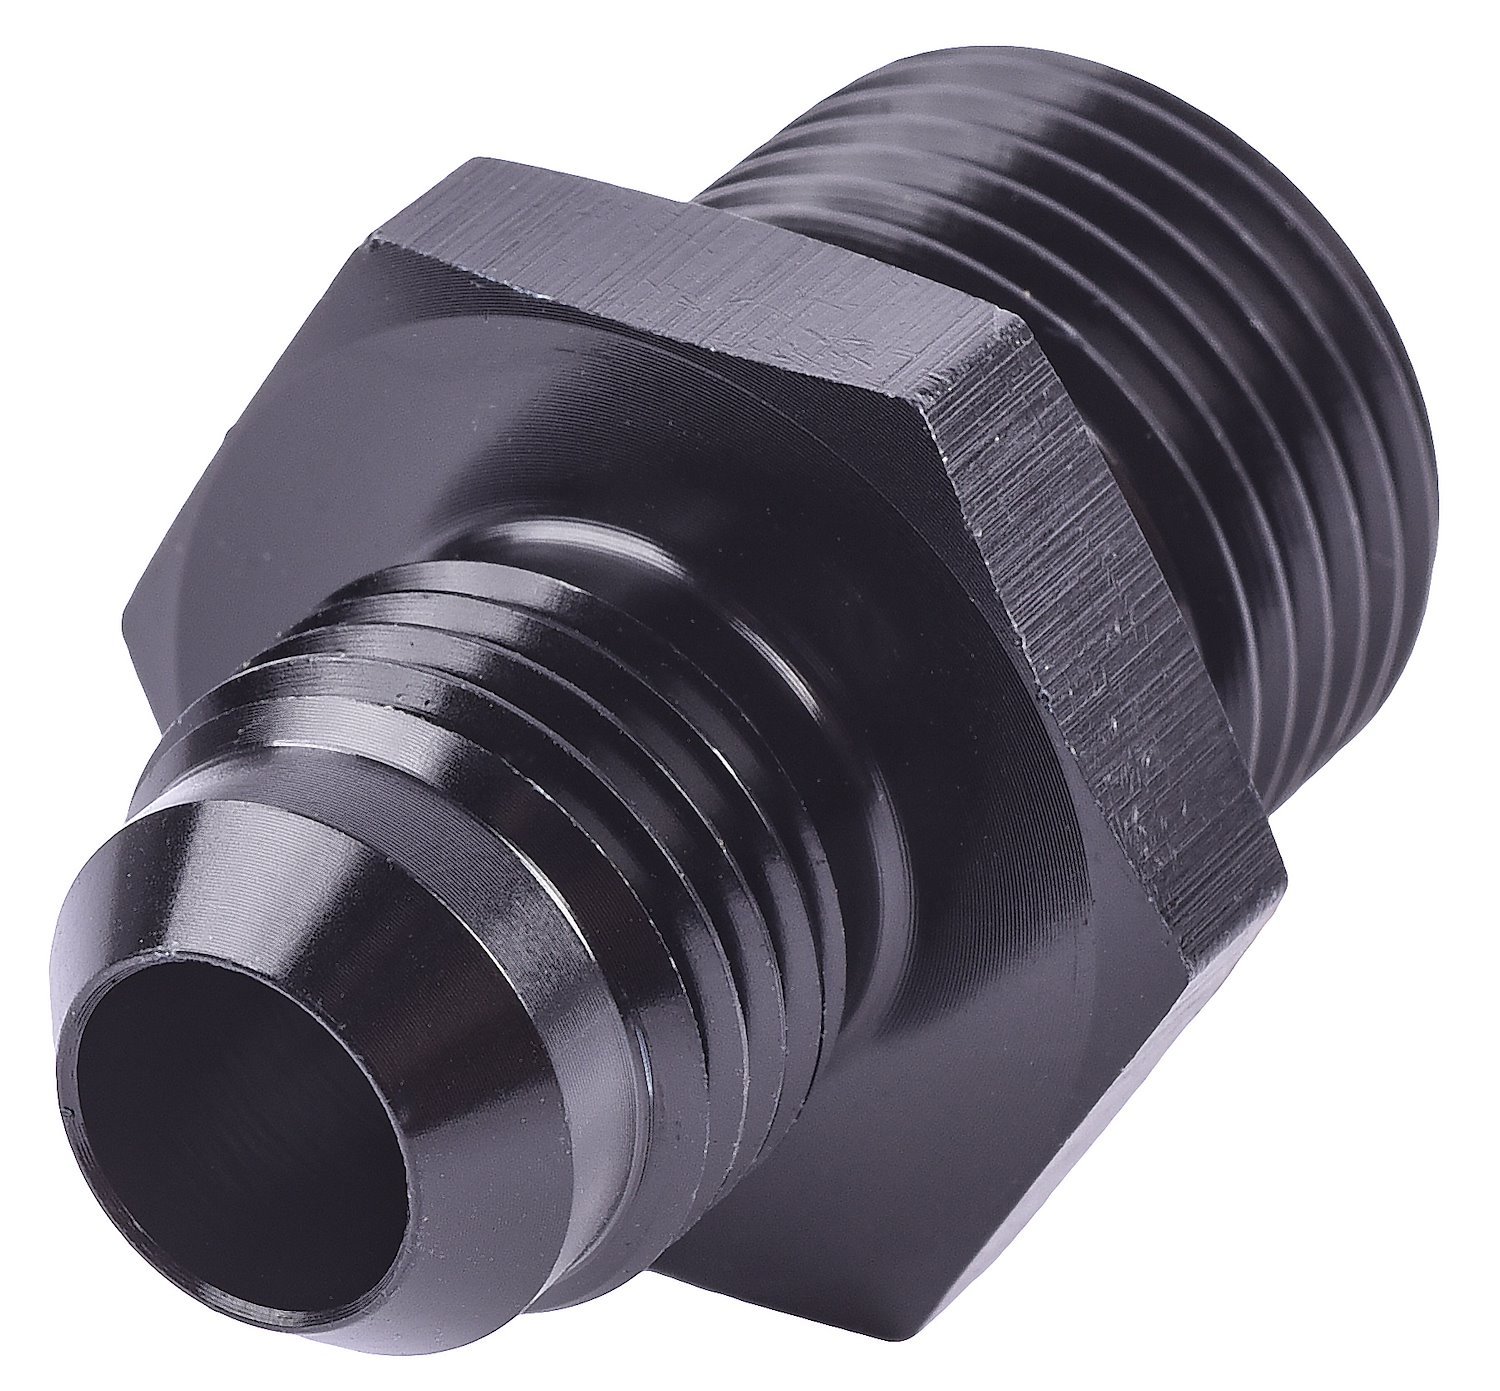 AN to Metric Adapter Fitting [-6 AN Male to 18mm x 1.5 Male, Black]